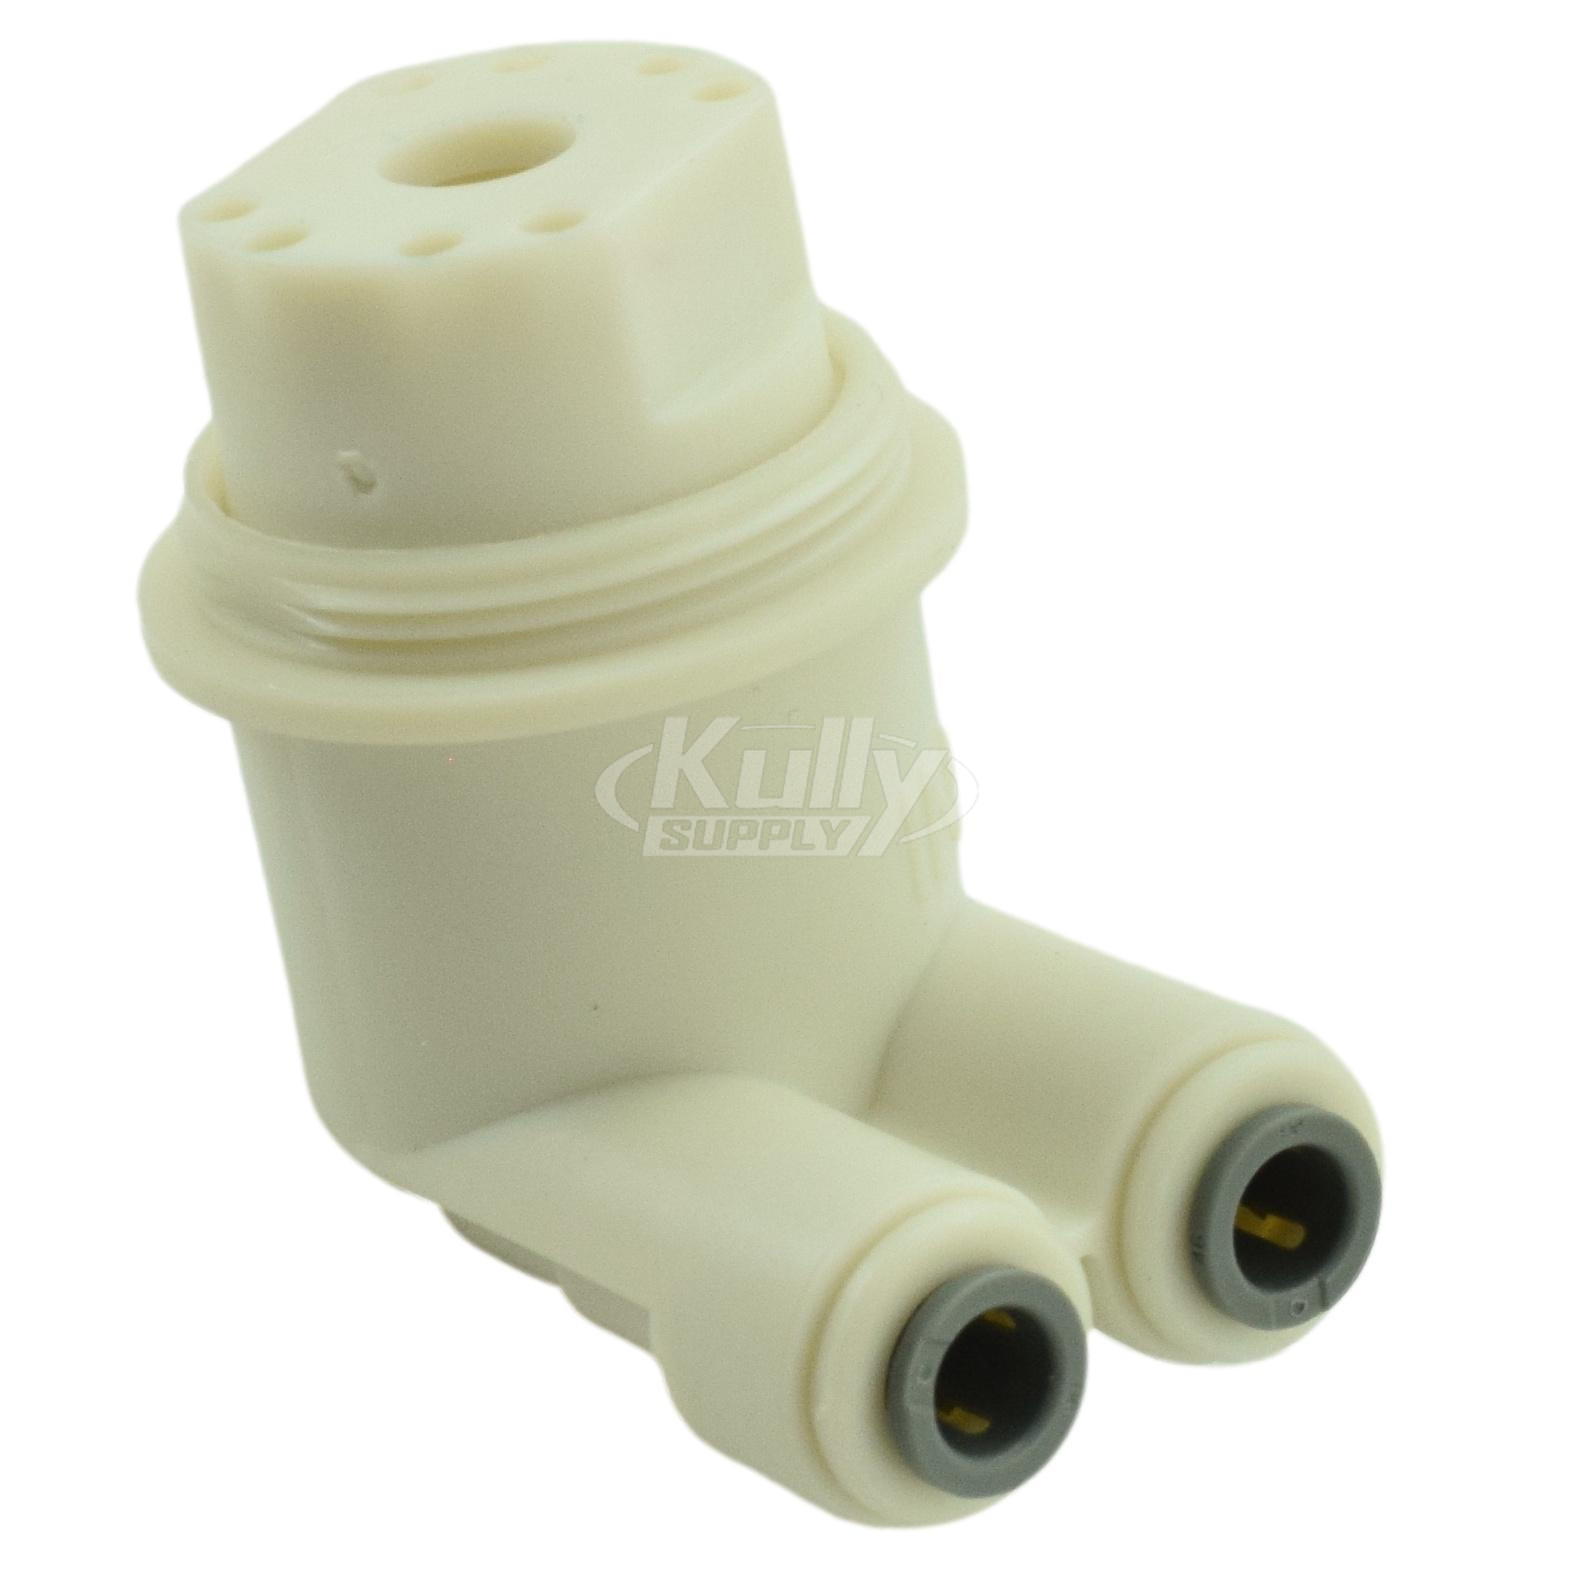 Elkay 1000004564 Red Spring Regulator Kit with Hold Open Nut - Post 2008